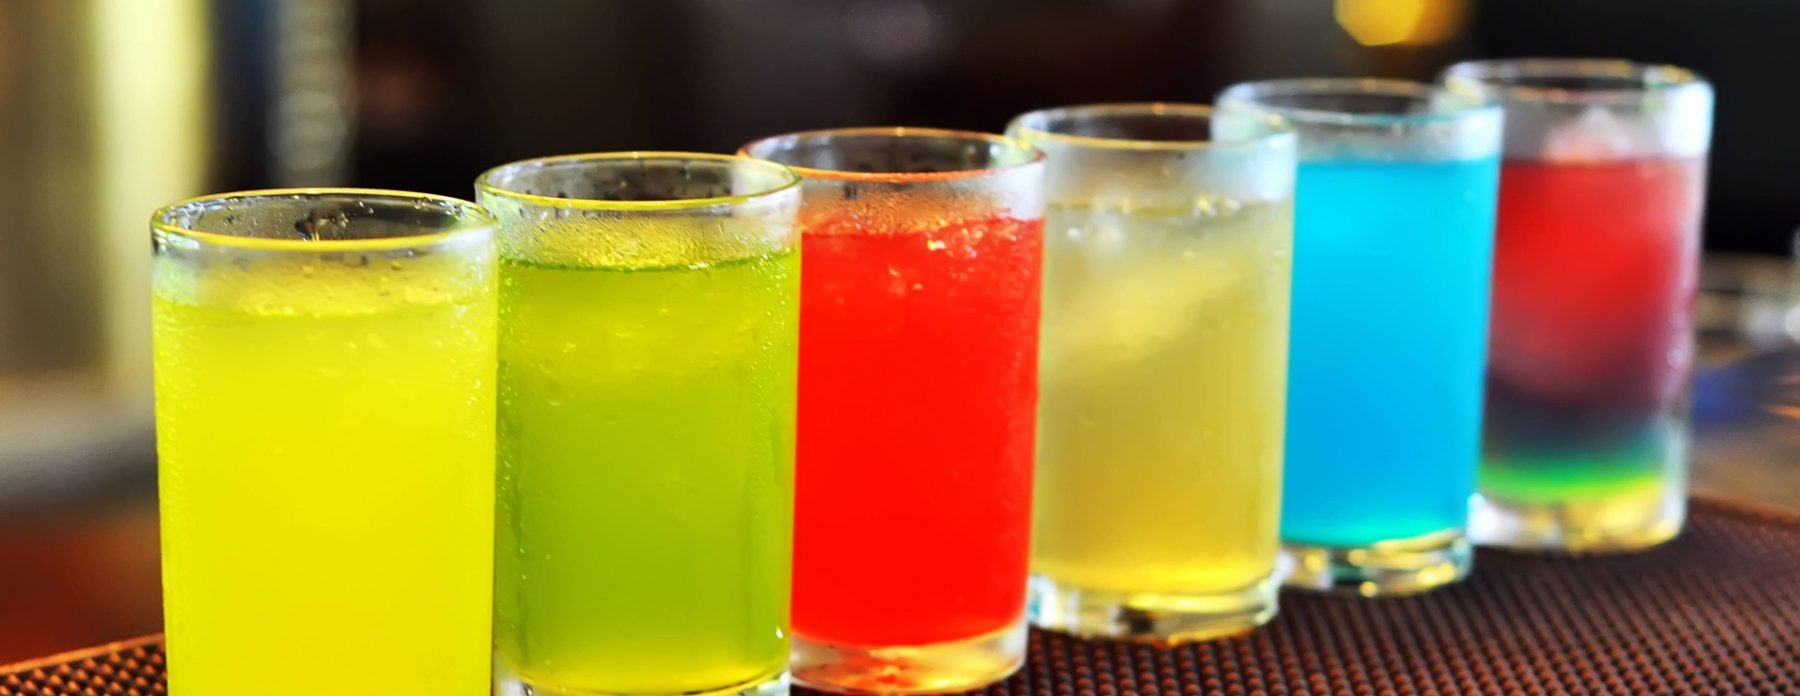 Cold-drinks-1800x696